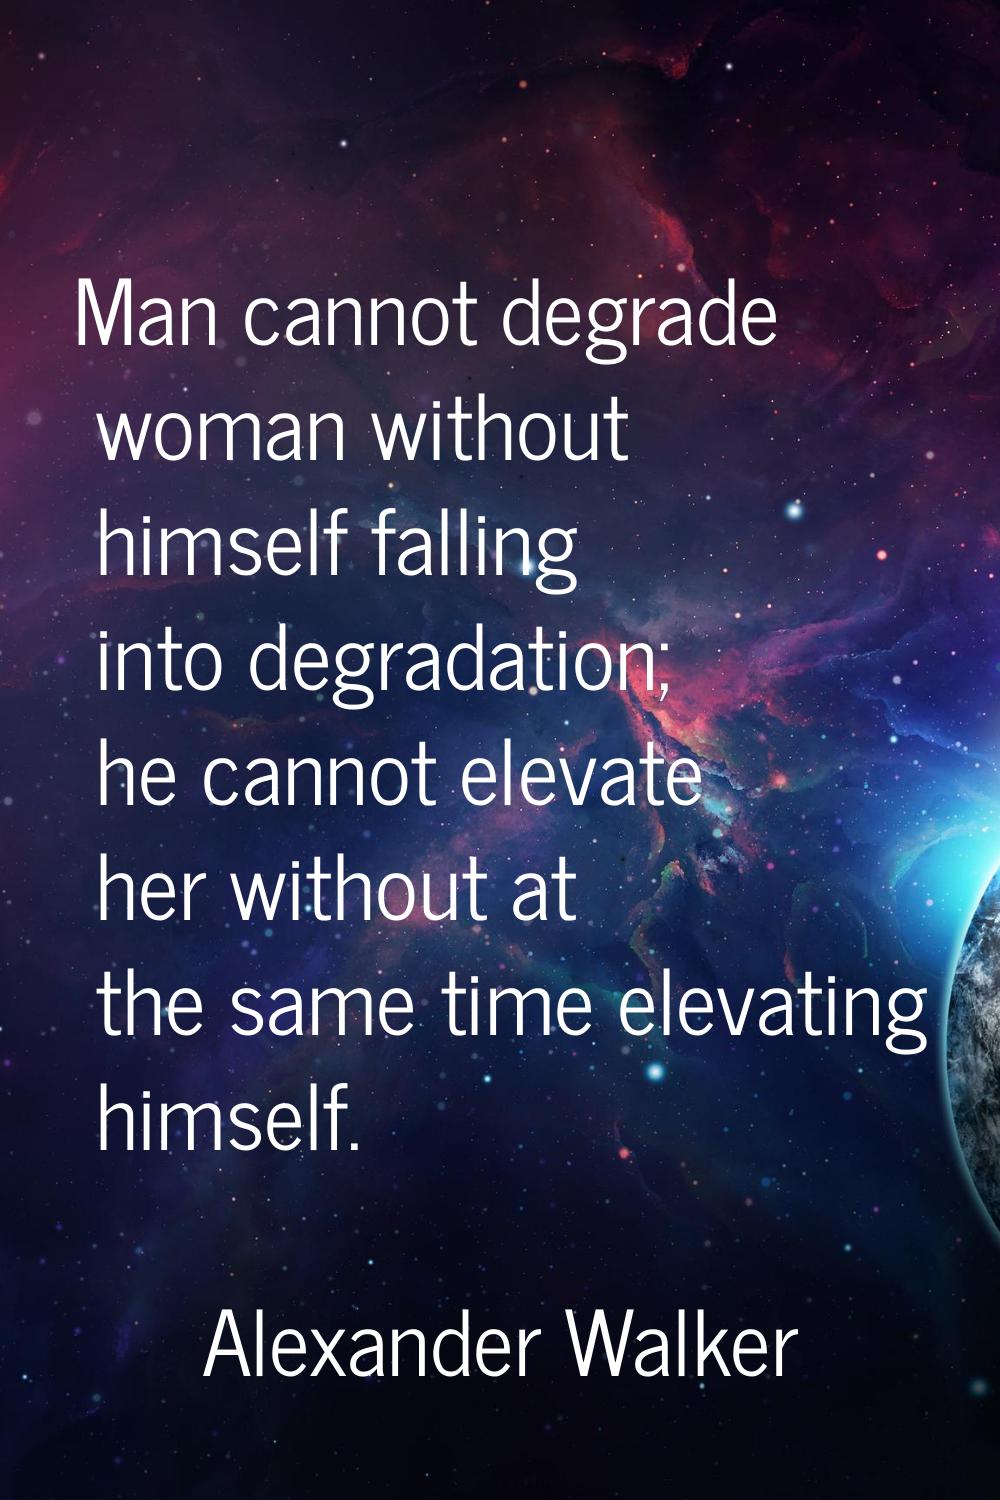 Man cannot degrade woman without himself falling into degradation; he cannot elevate her without at